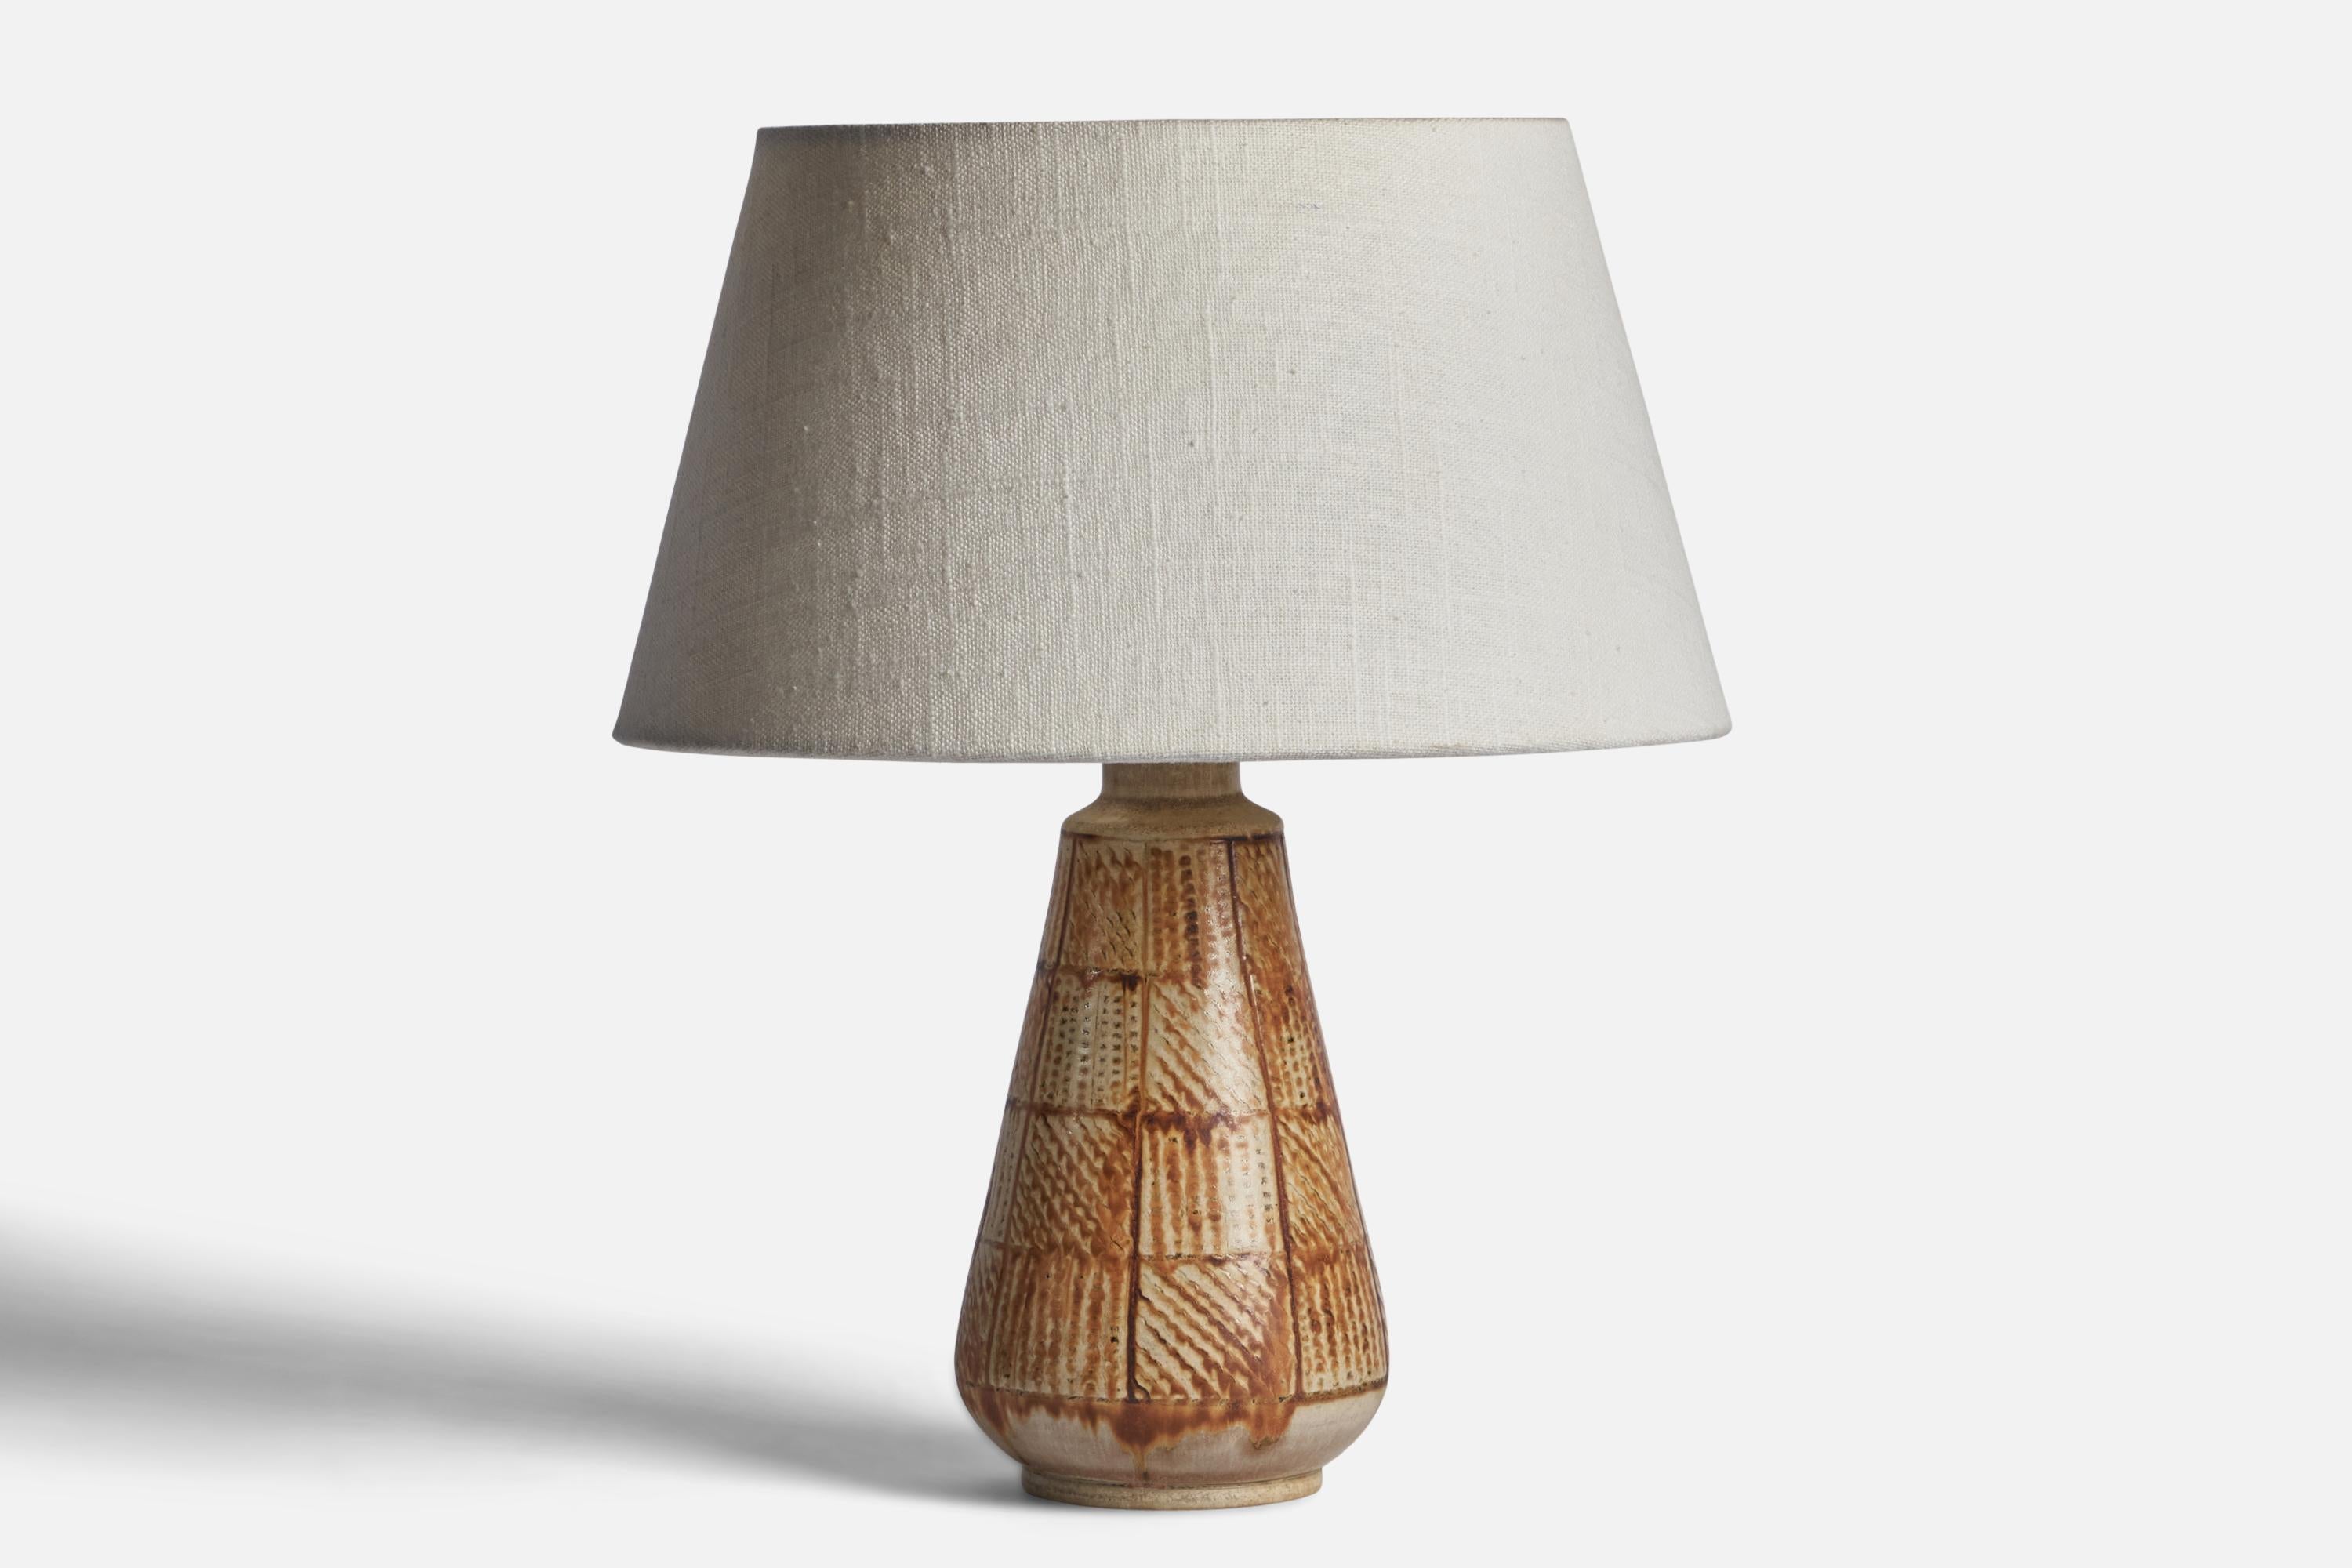 
A brown and beige-glazed stoneware table lamp designed and produced by Andersson & Johansson, Höganäs, Sweden, c. 1950s
Dimensions of Lamp (inches): 9.25” H x 3.95” Diameter
Dimensions of Shade (inches): 7” Top Diameter x 10” Bottom Diameter x 5.5”